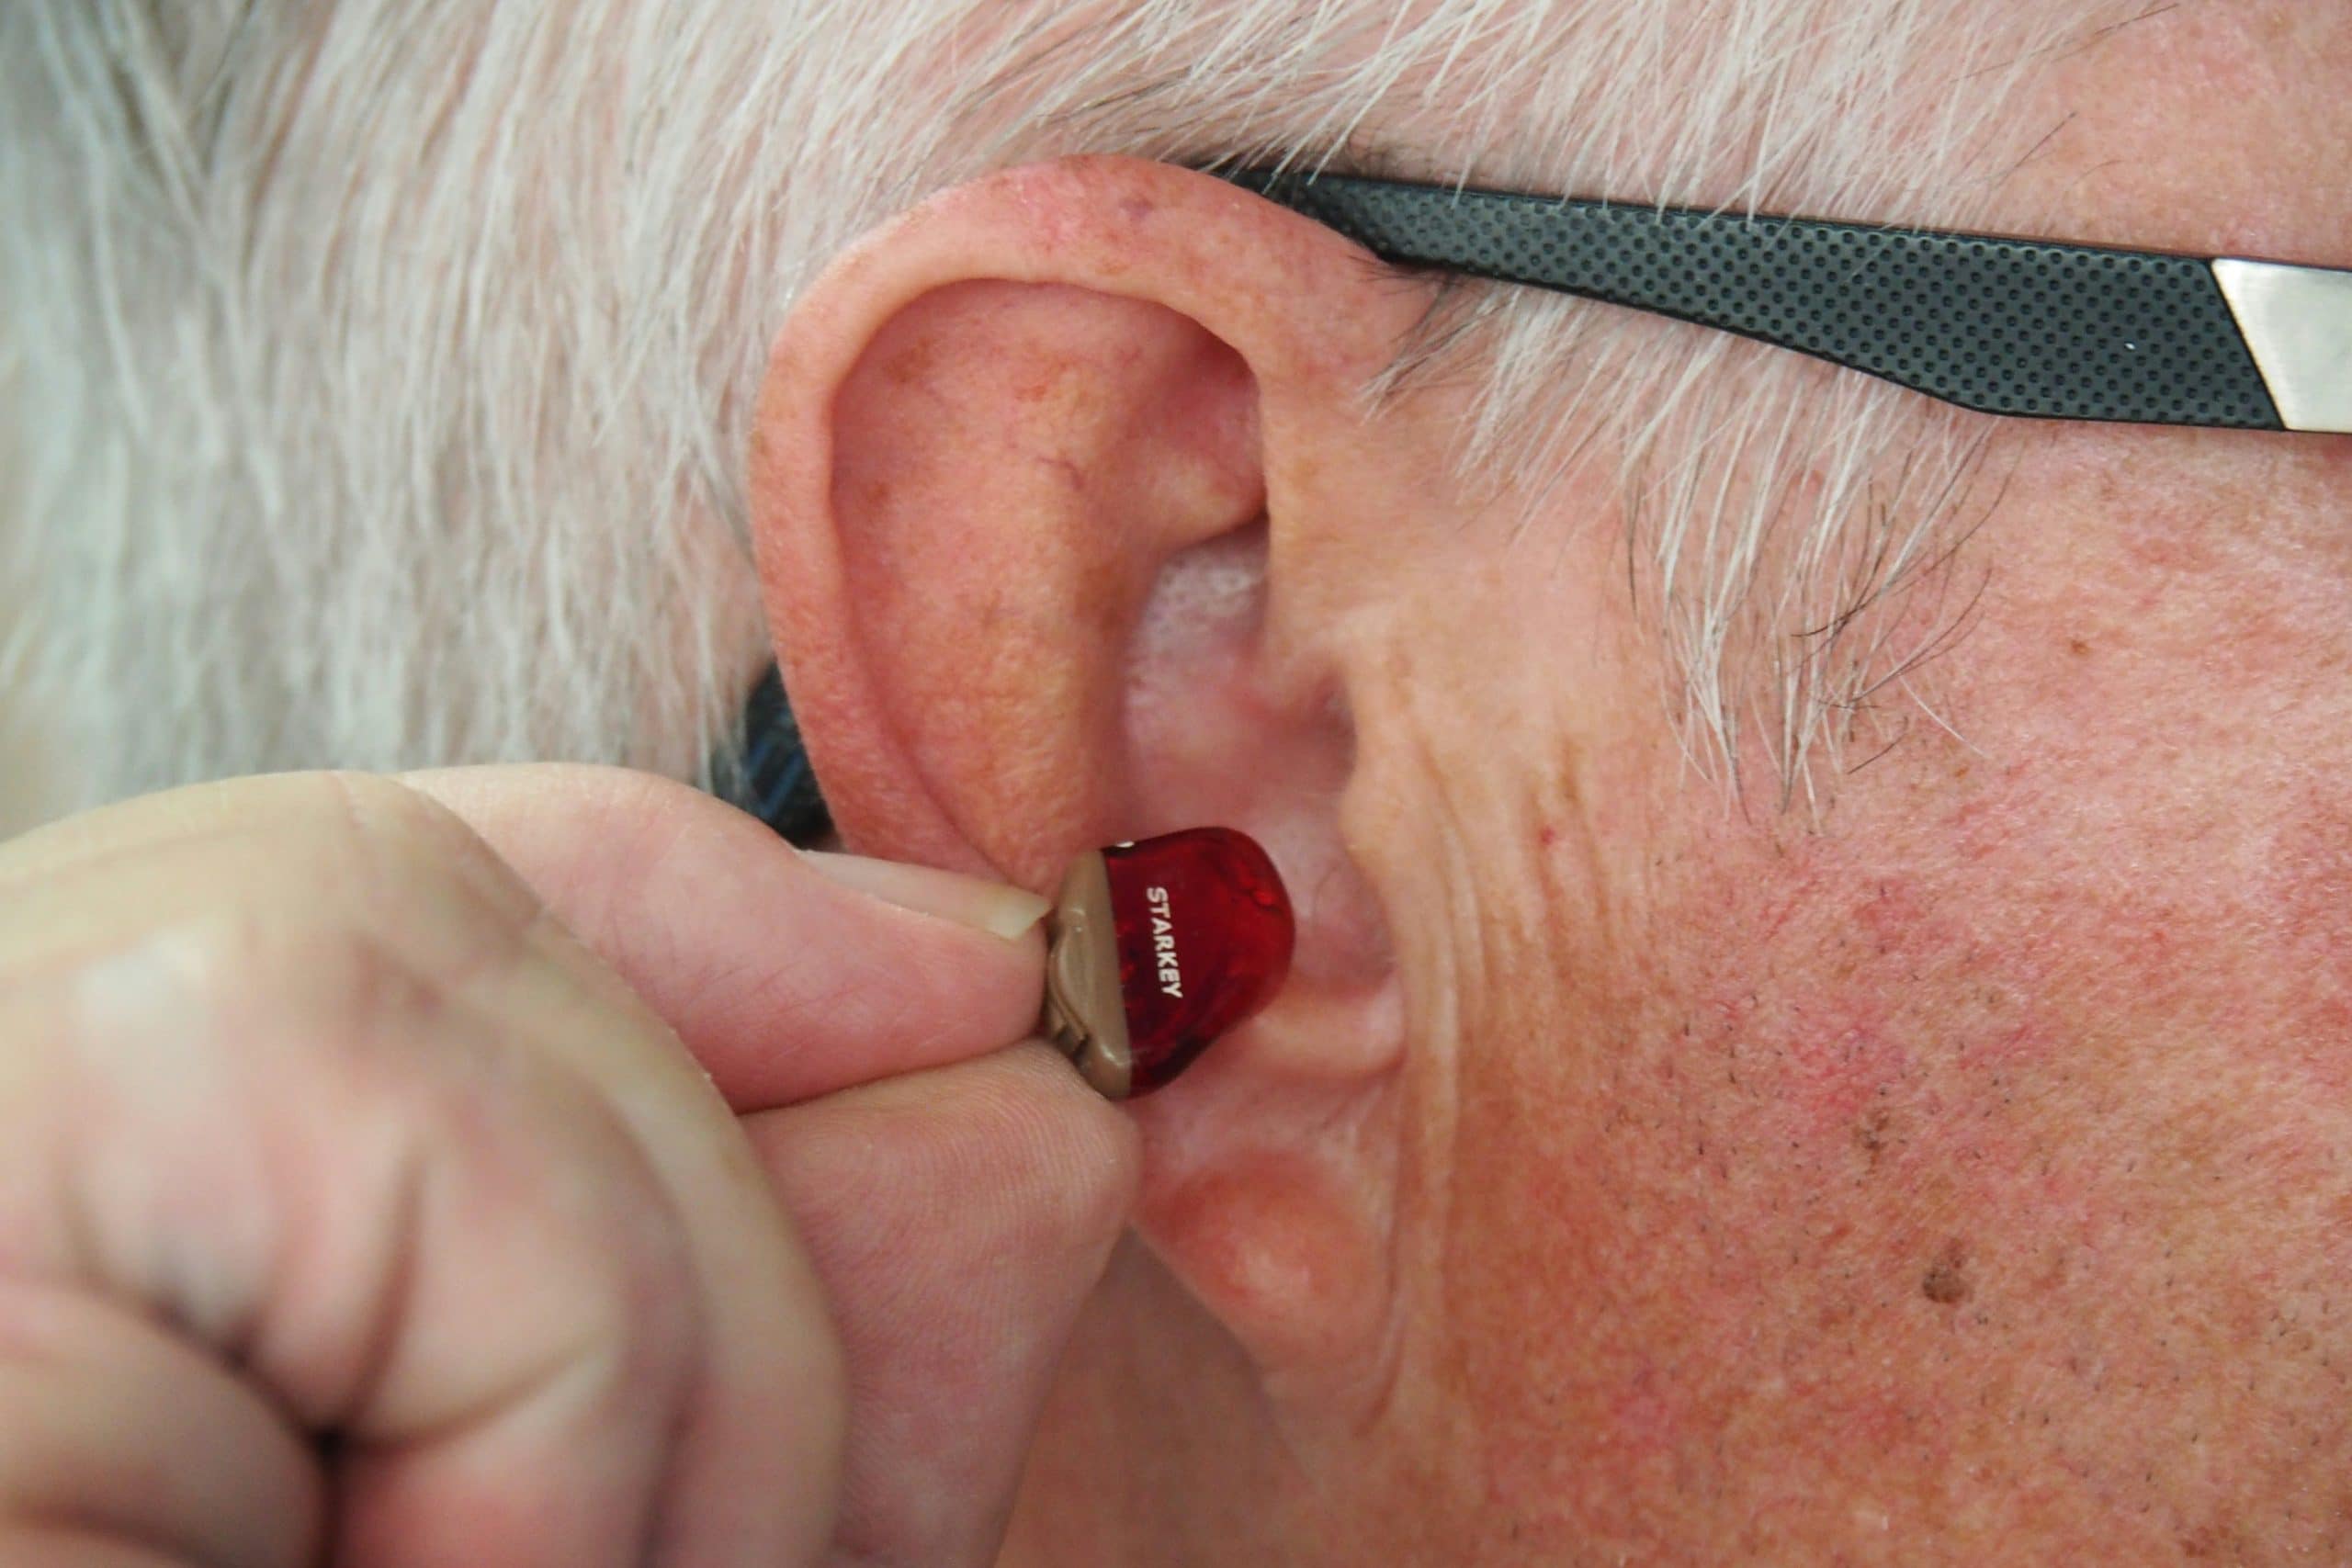 Guide to Choosing Hearing Aids and Making Sure the Fitting Is Ideal